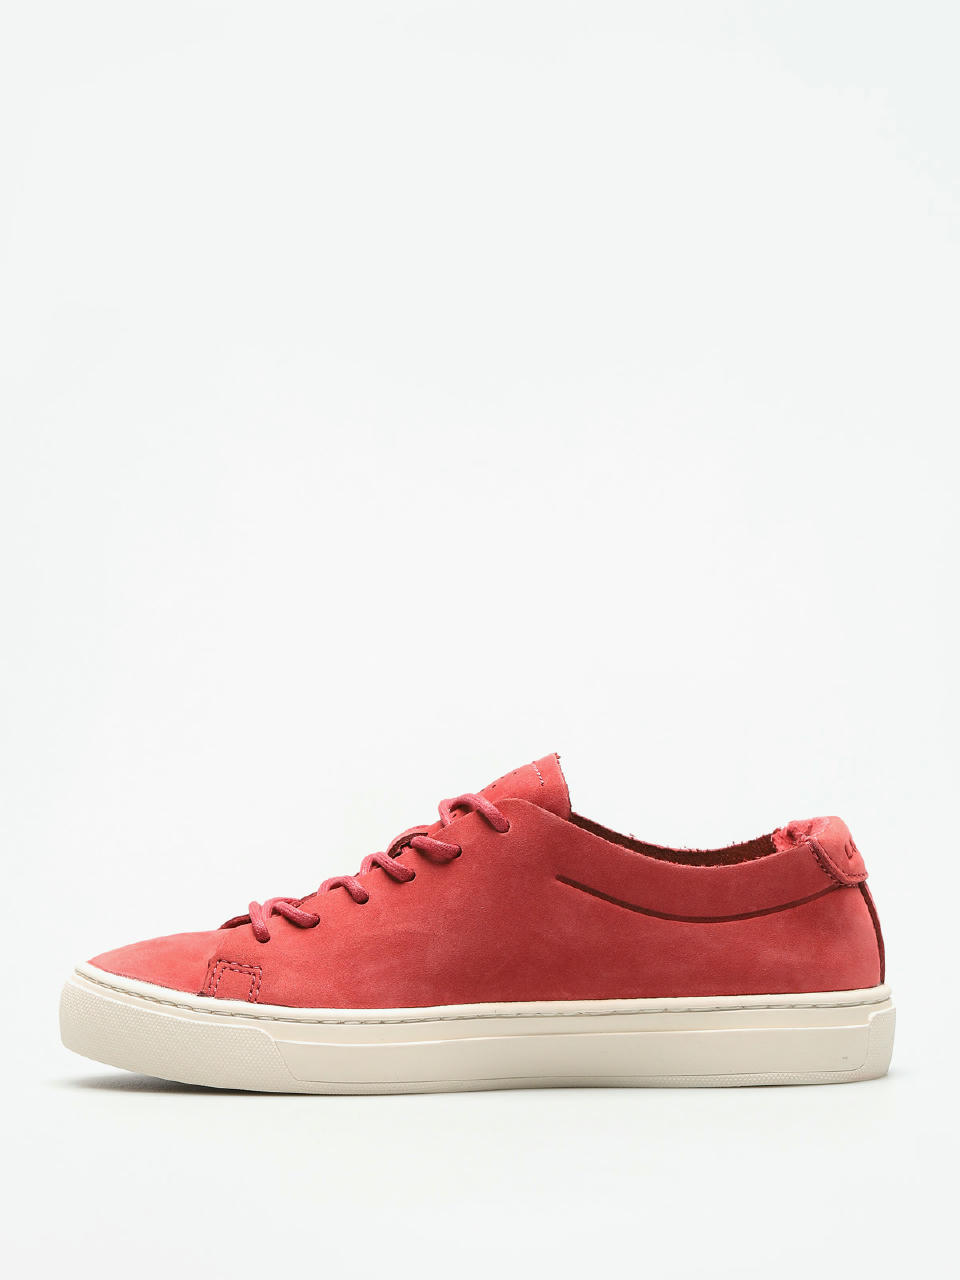 Lacoste Shoes L 12 12 Unlined 118 (red/off